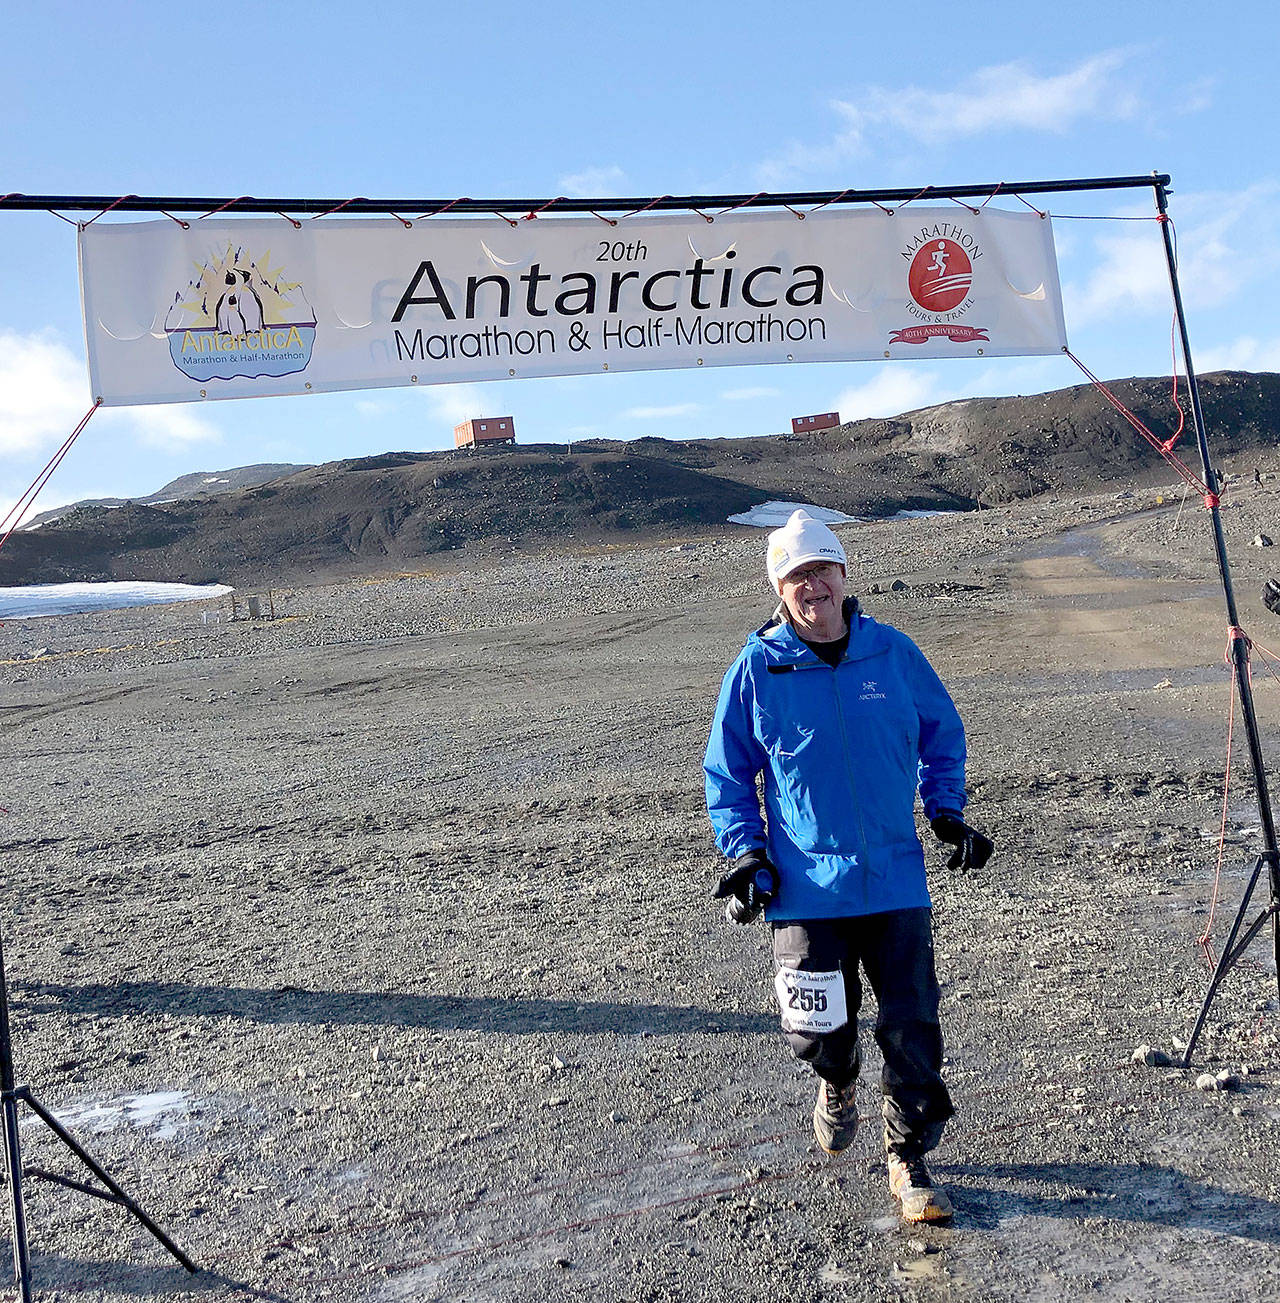 Port Angeles’ Bruce Skinner crosses the finish line after finishing a marathon on King George Island off the coast of Antarctica on March 18. Skinner fought cold and mud and steep hills to finish in 6 hours, 38 minutes, finishing second in his 70-plus age group.